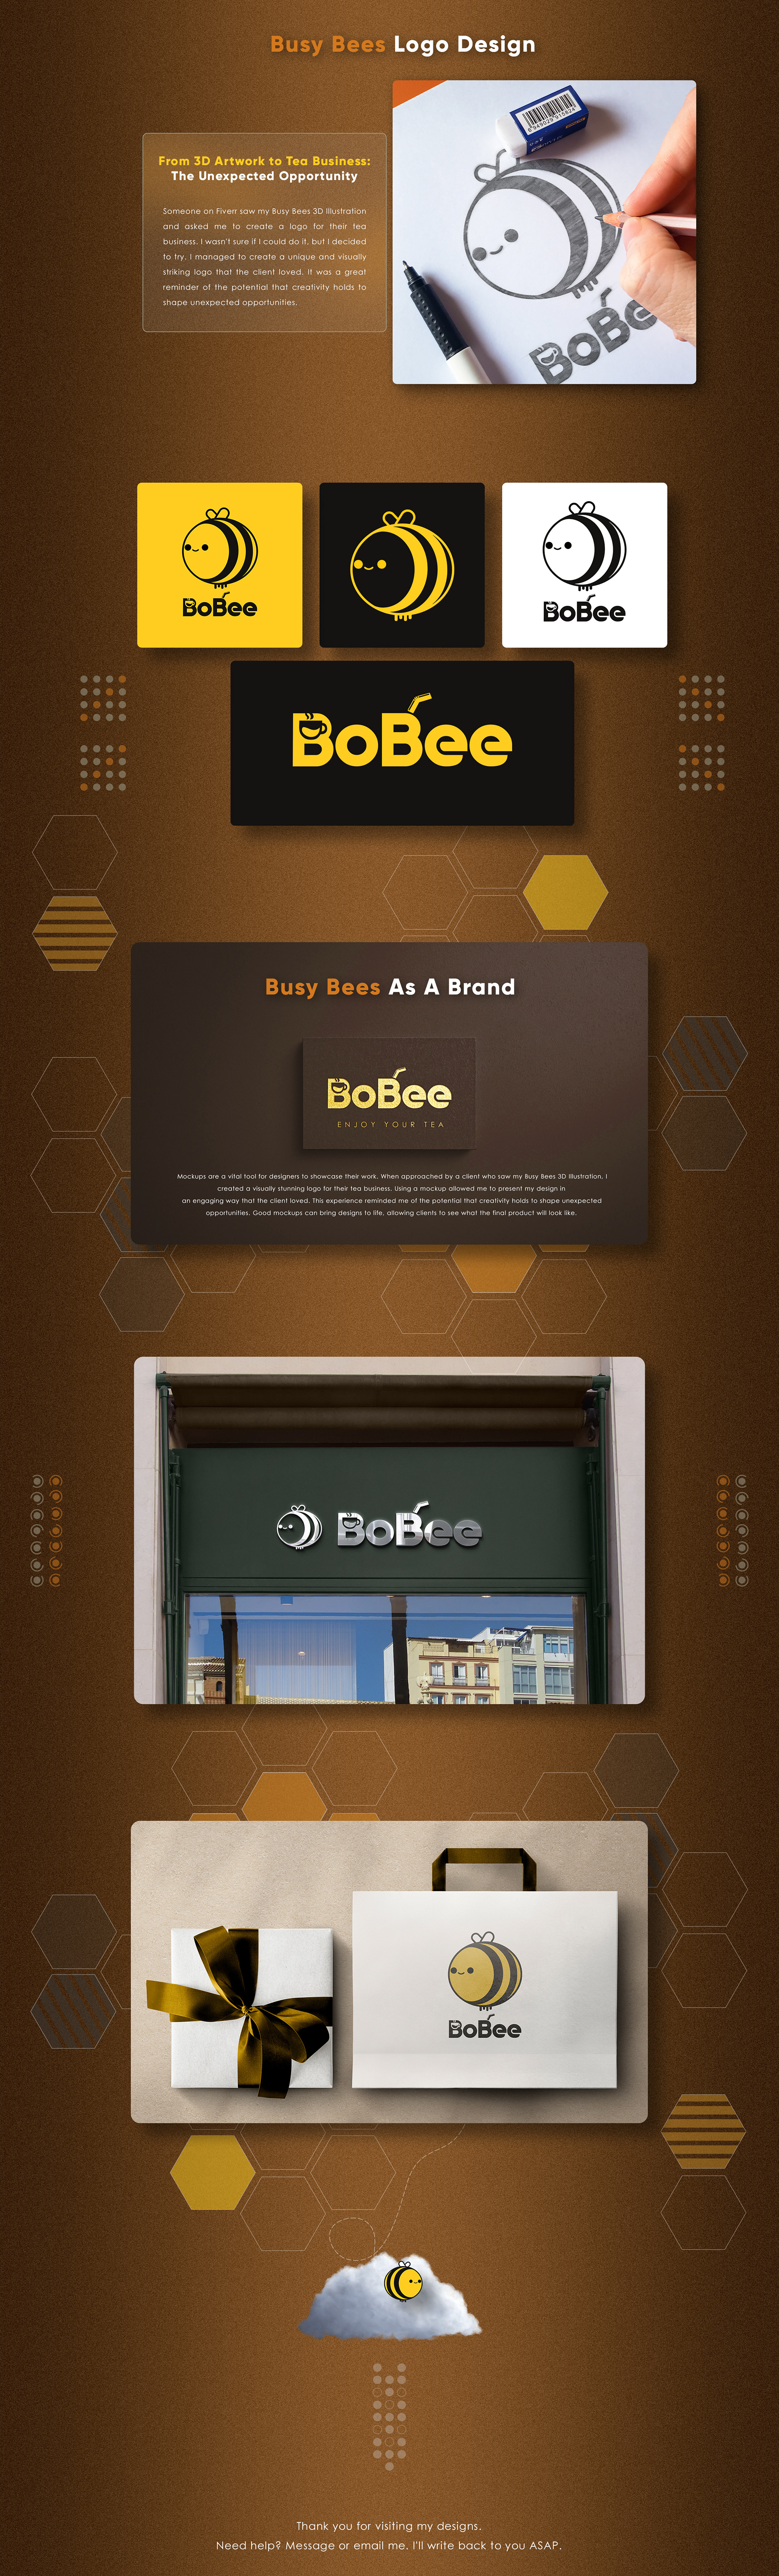 Bobee inspired by Busy Bees 3D Illustration